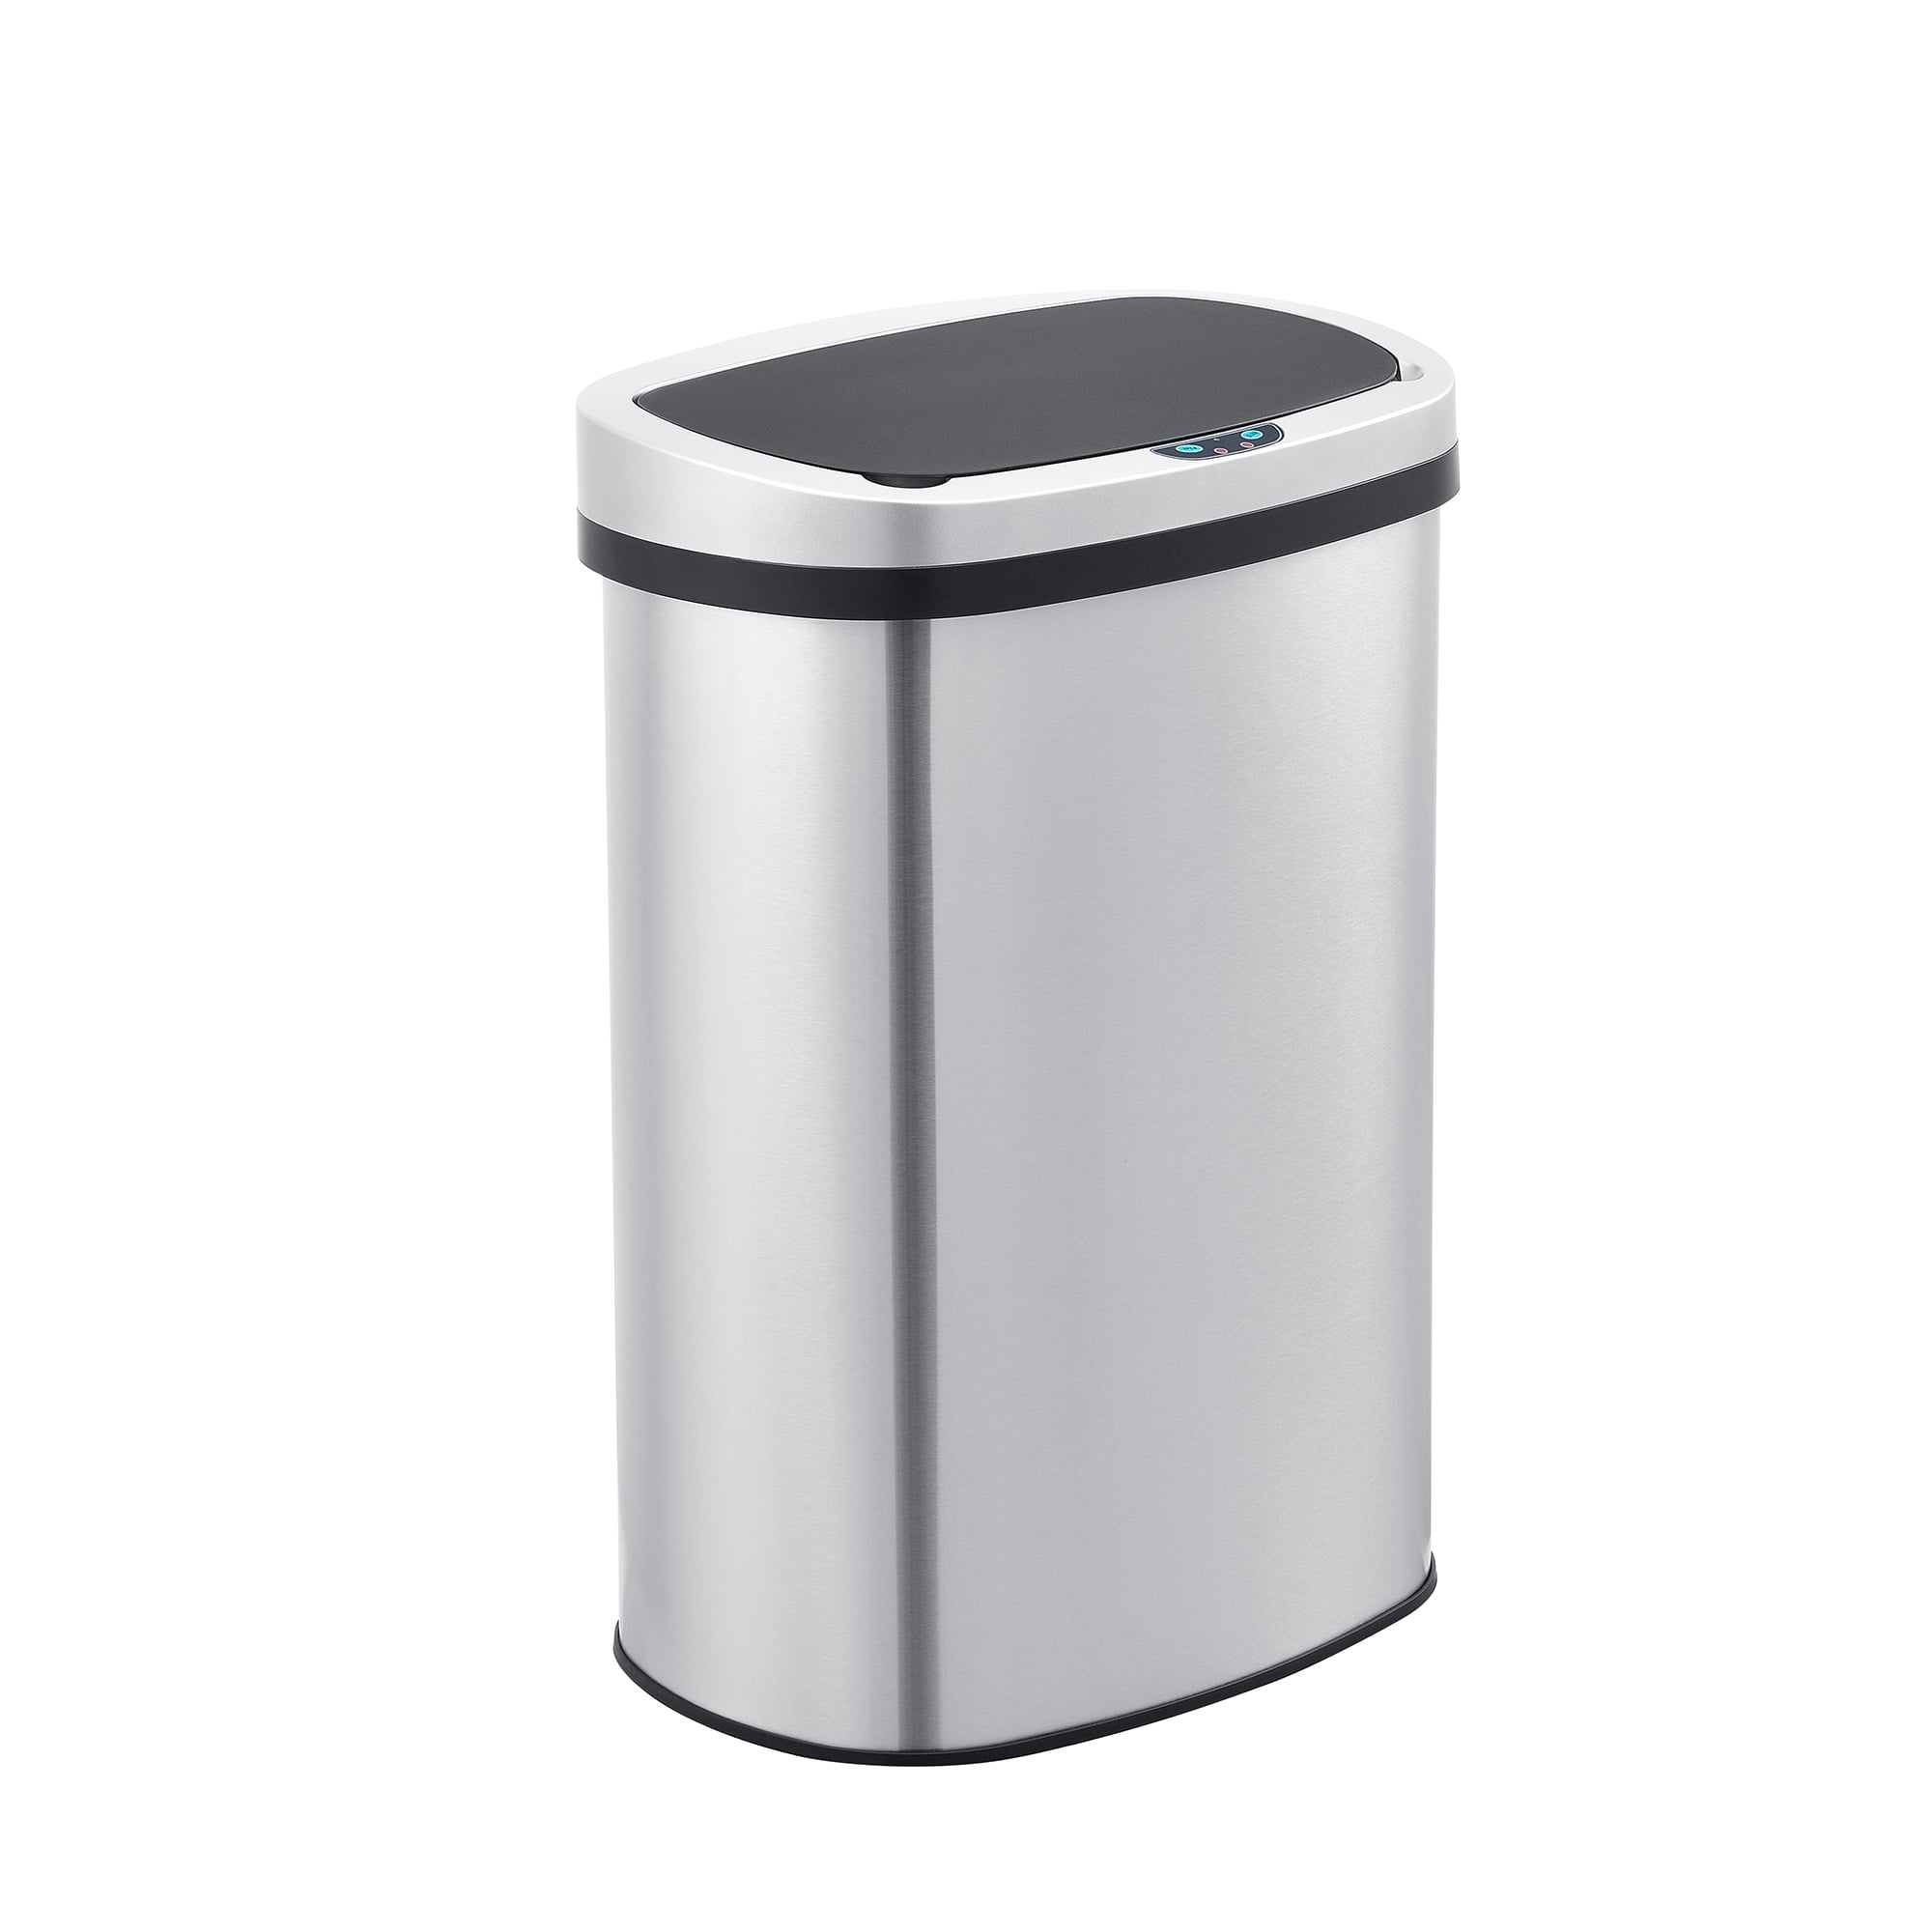 Stainless Steel 13.2 Gal/50 L Motion Sensor Trash Can Details about   Mainstays 